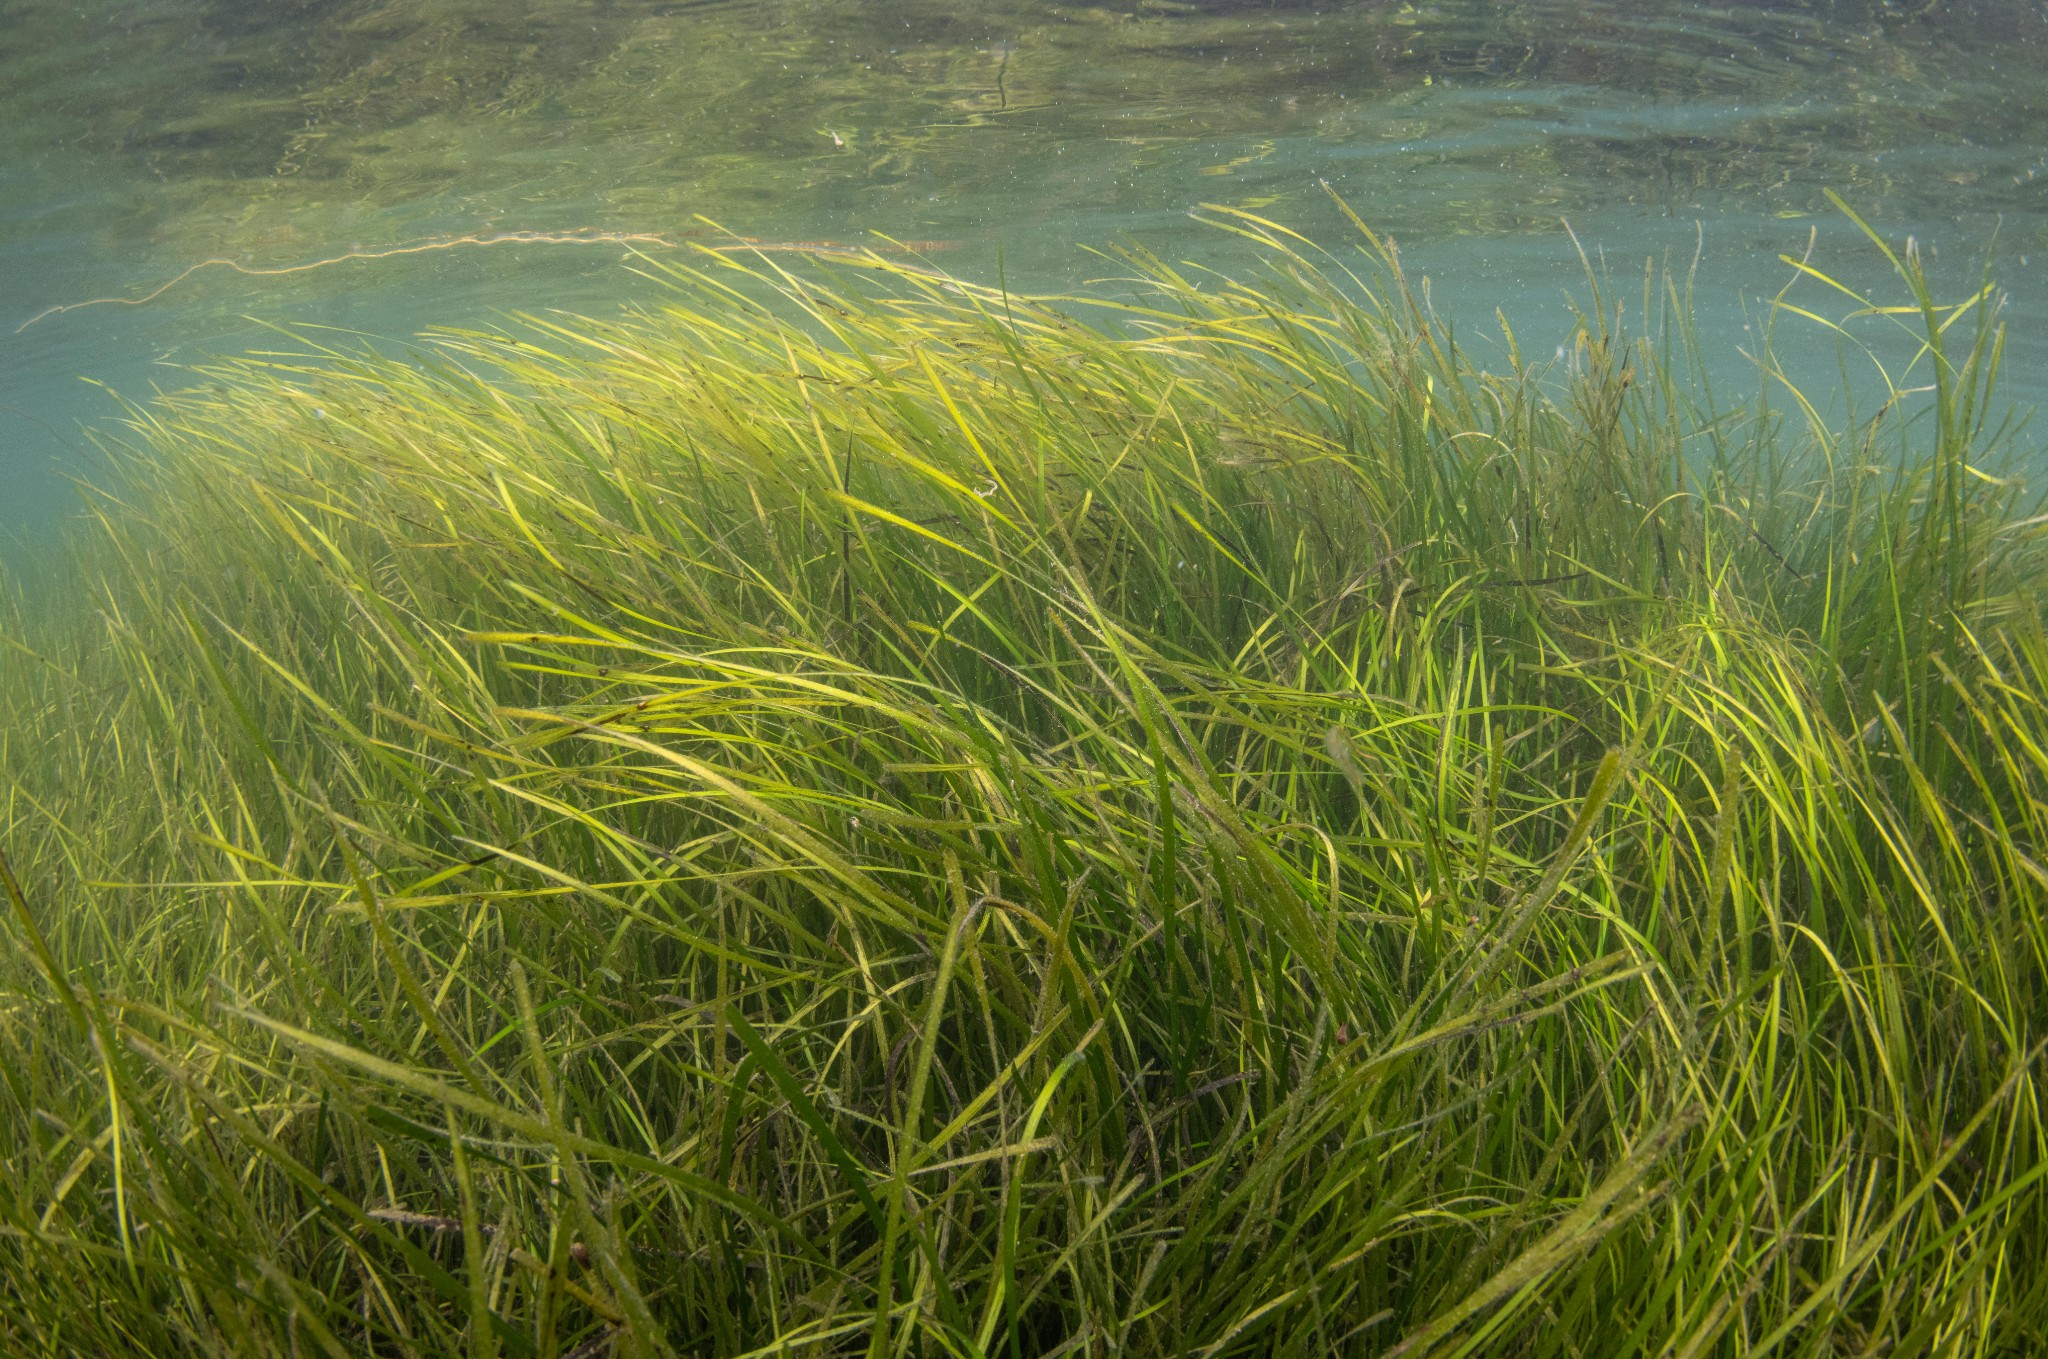 Seagrass in Orkney - image by Raymond Besant